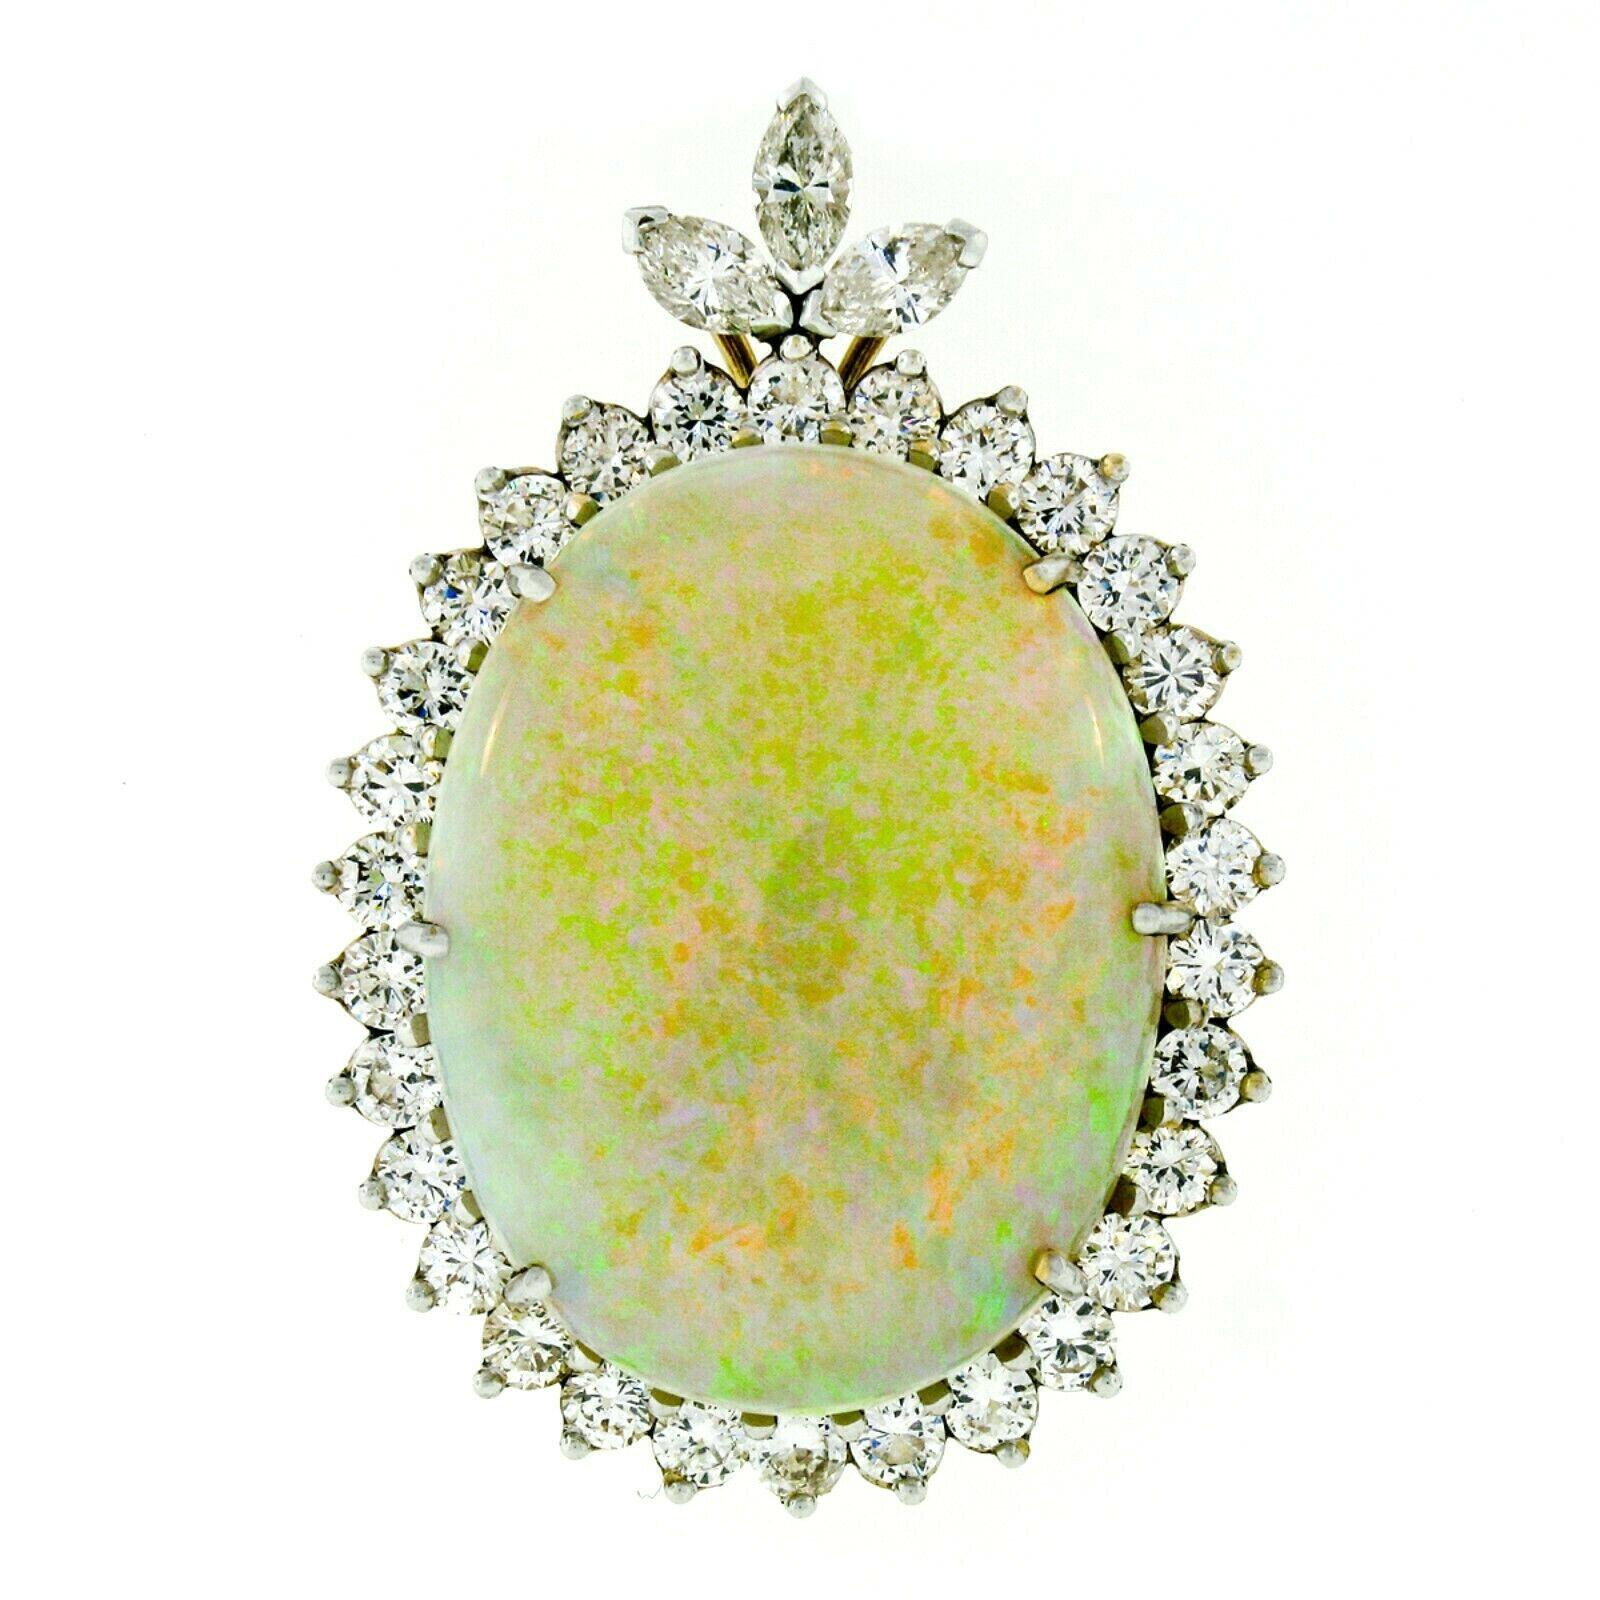 You are looking at a jaw-dropping piece that is hand crafted in solid 14k yellow gold and features a large slide pendant which is set with a very fine quality opal of unusually large size with a magnificent diamond frame. The opal has been GIA